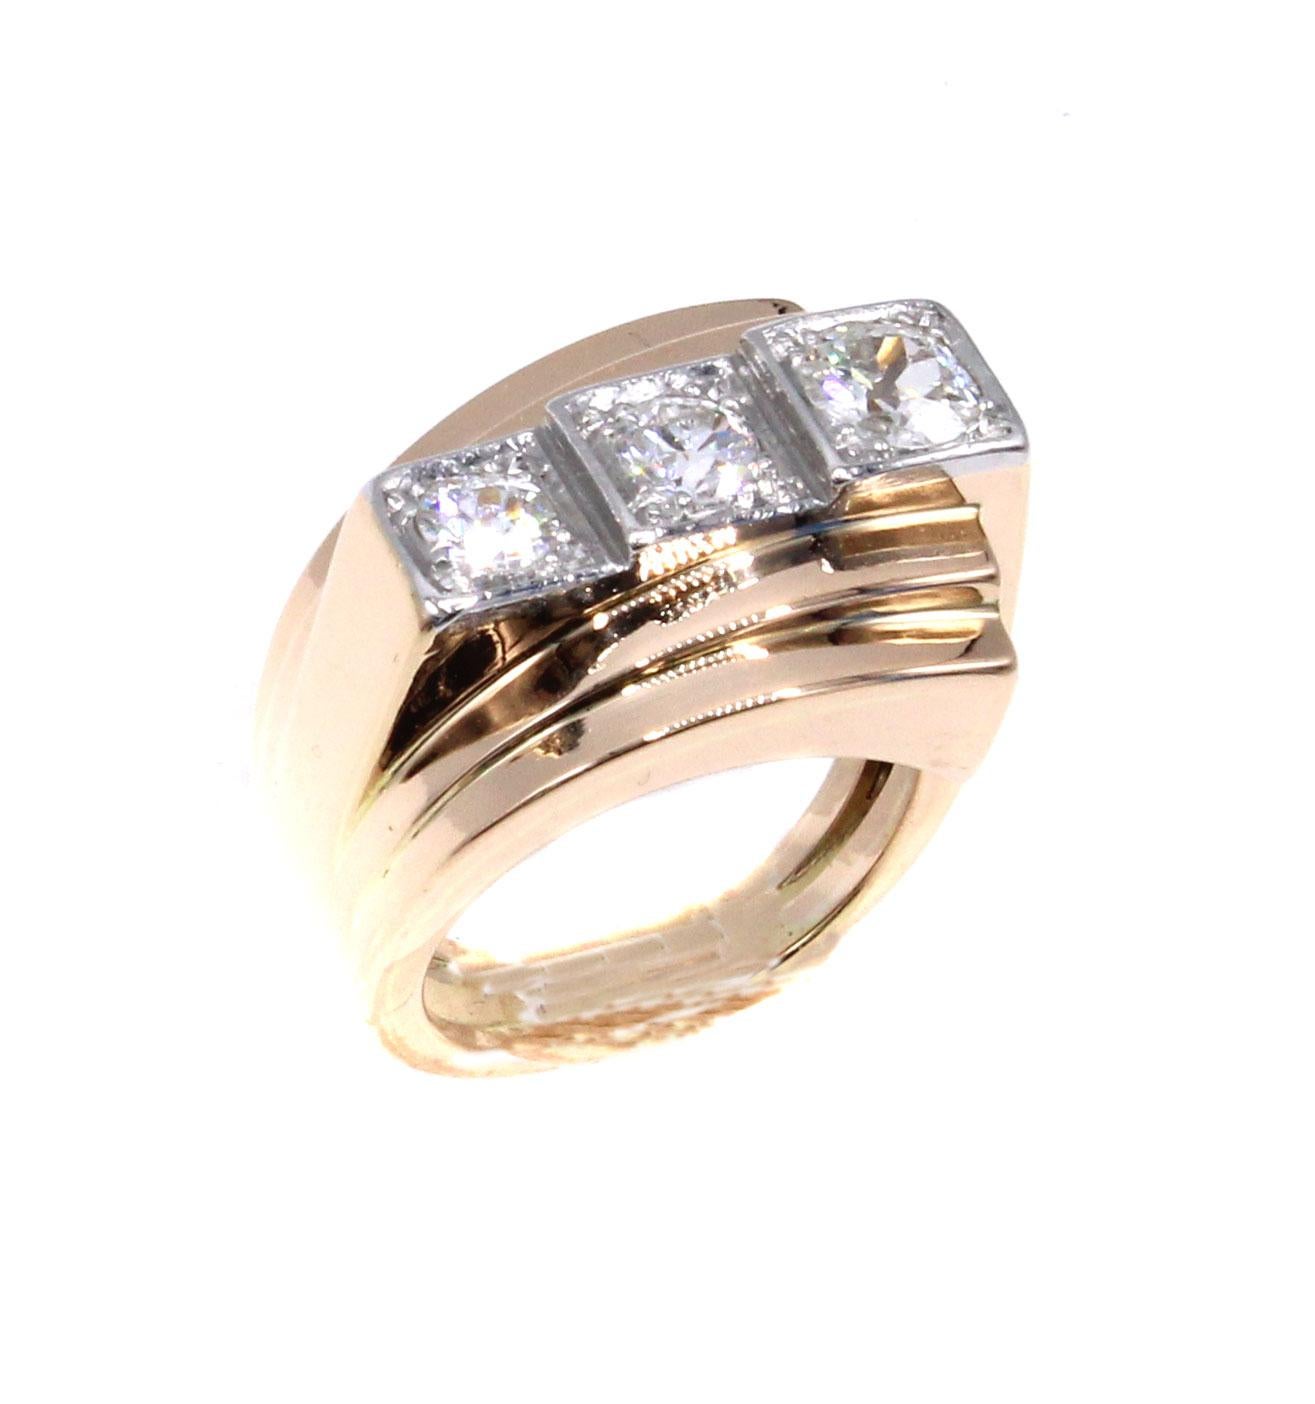 Masterfully hand-crafted in 18 karat rose-gold and platinum this French Retro ring from ca 1940 displays an true avant-garde look. The asymmetrical construction of curved bands of gold at different levels on either side of the ring, with 3 Old